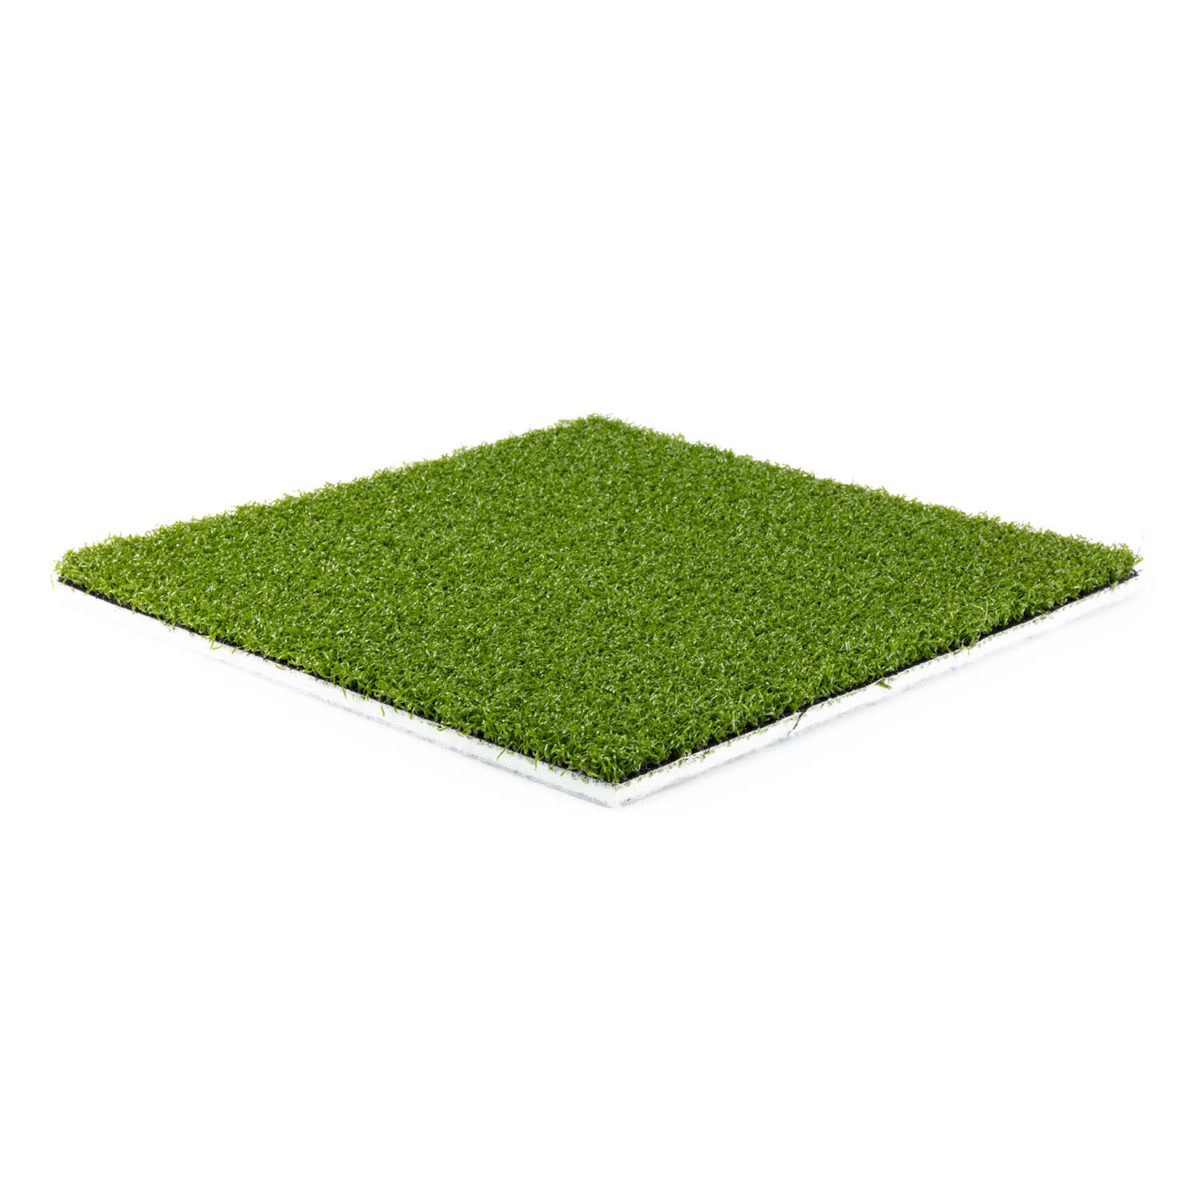 Rooftop Turf Overview